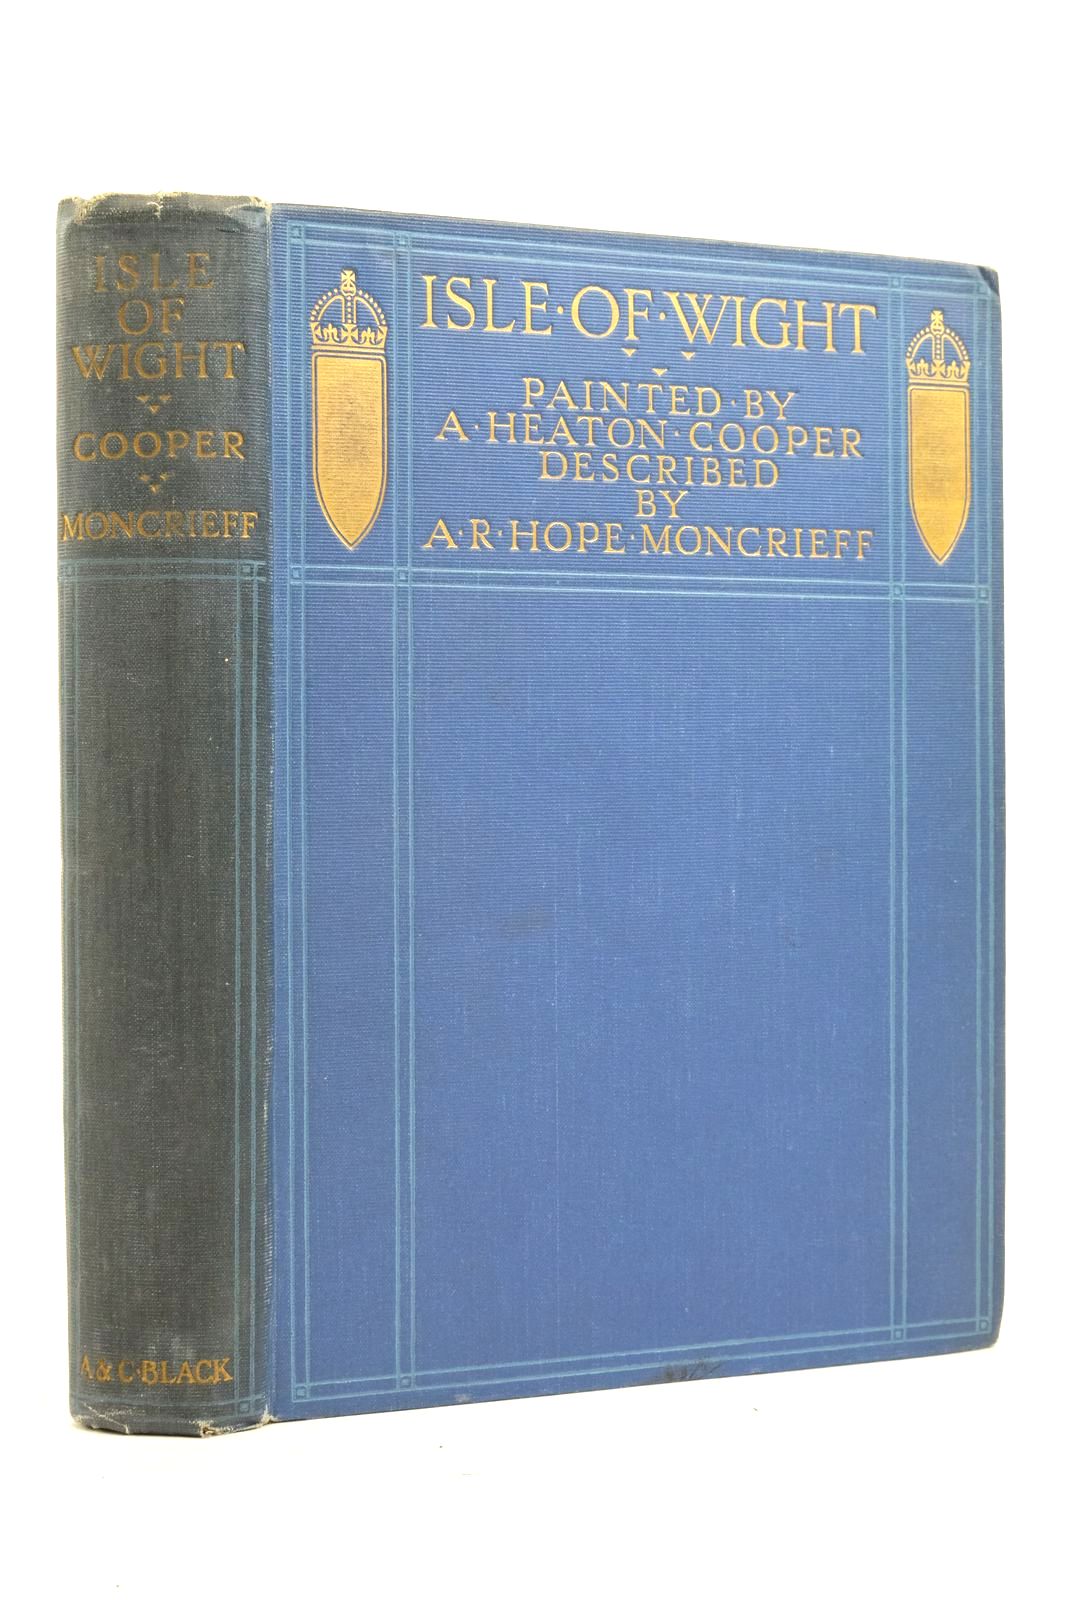 Photo of ISLE OF WIGHT written by Moncrieff, A.R. Hope illustrated by Cooper, A. Heaton published by Adam & Charles Black (STOCK CODE: 2137597)  for sale by Stella & Rose's Books